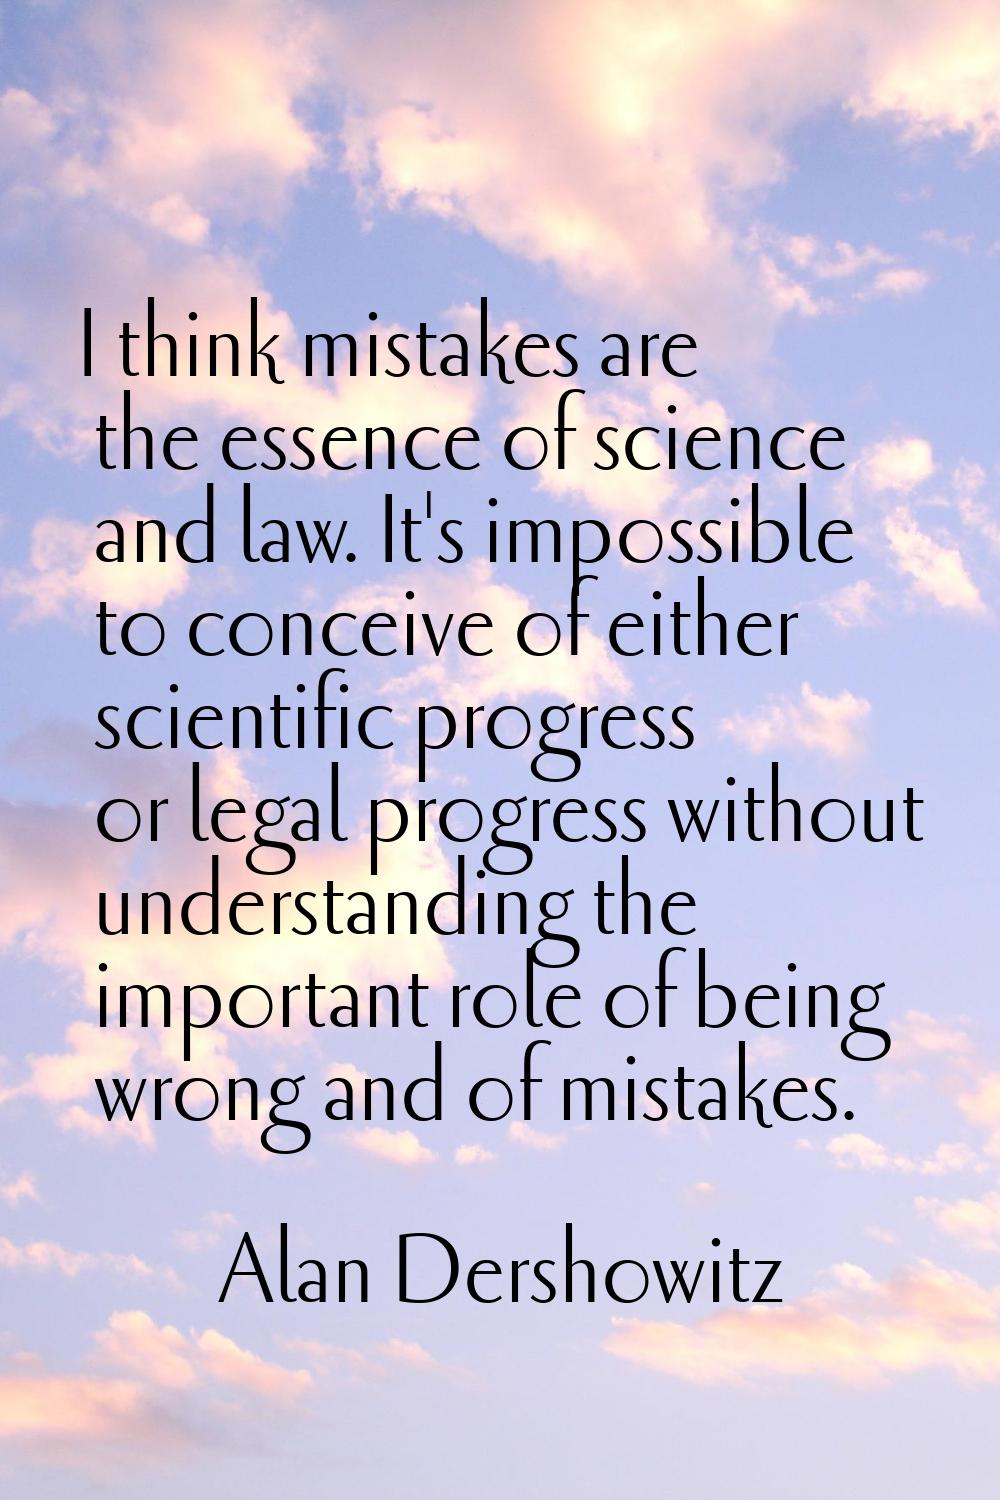 I think mistakes are the essence of science and law. It's impossible to conceive of either scientif